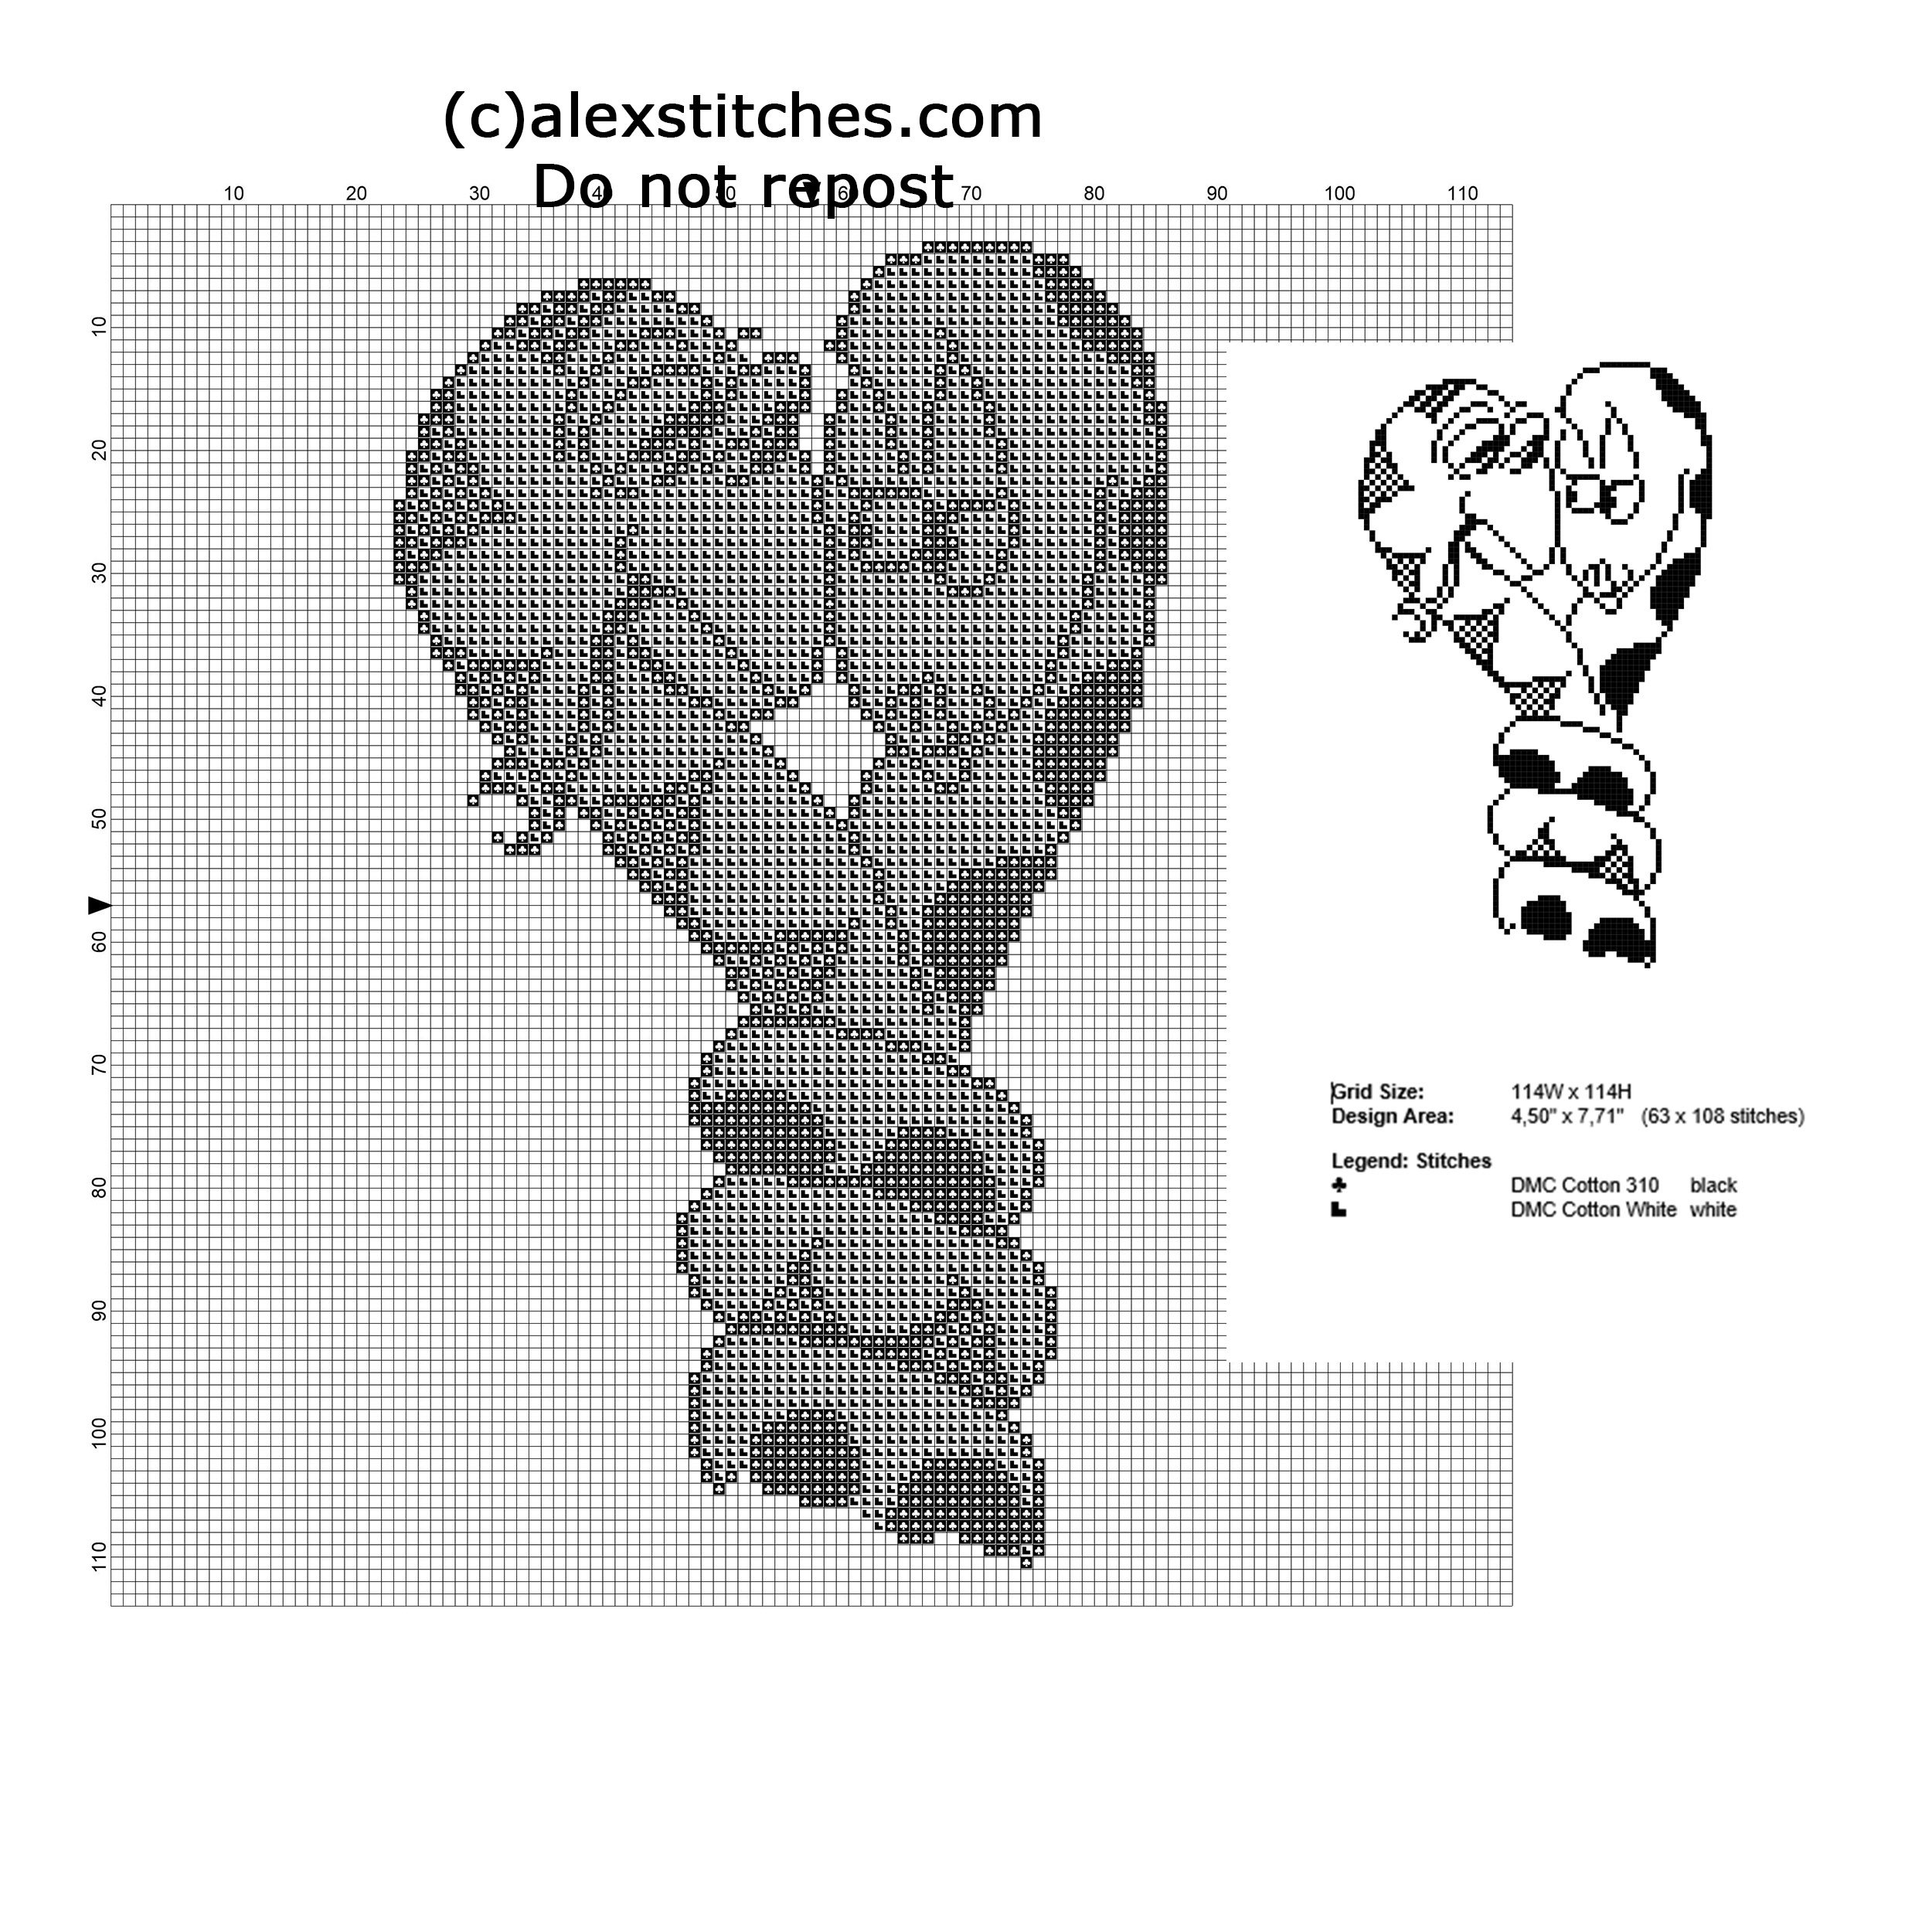 Two snakes in love free black and white cross stitch pattern